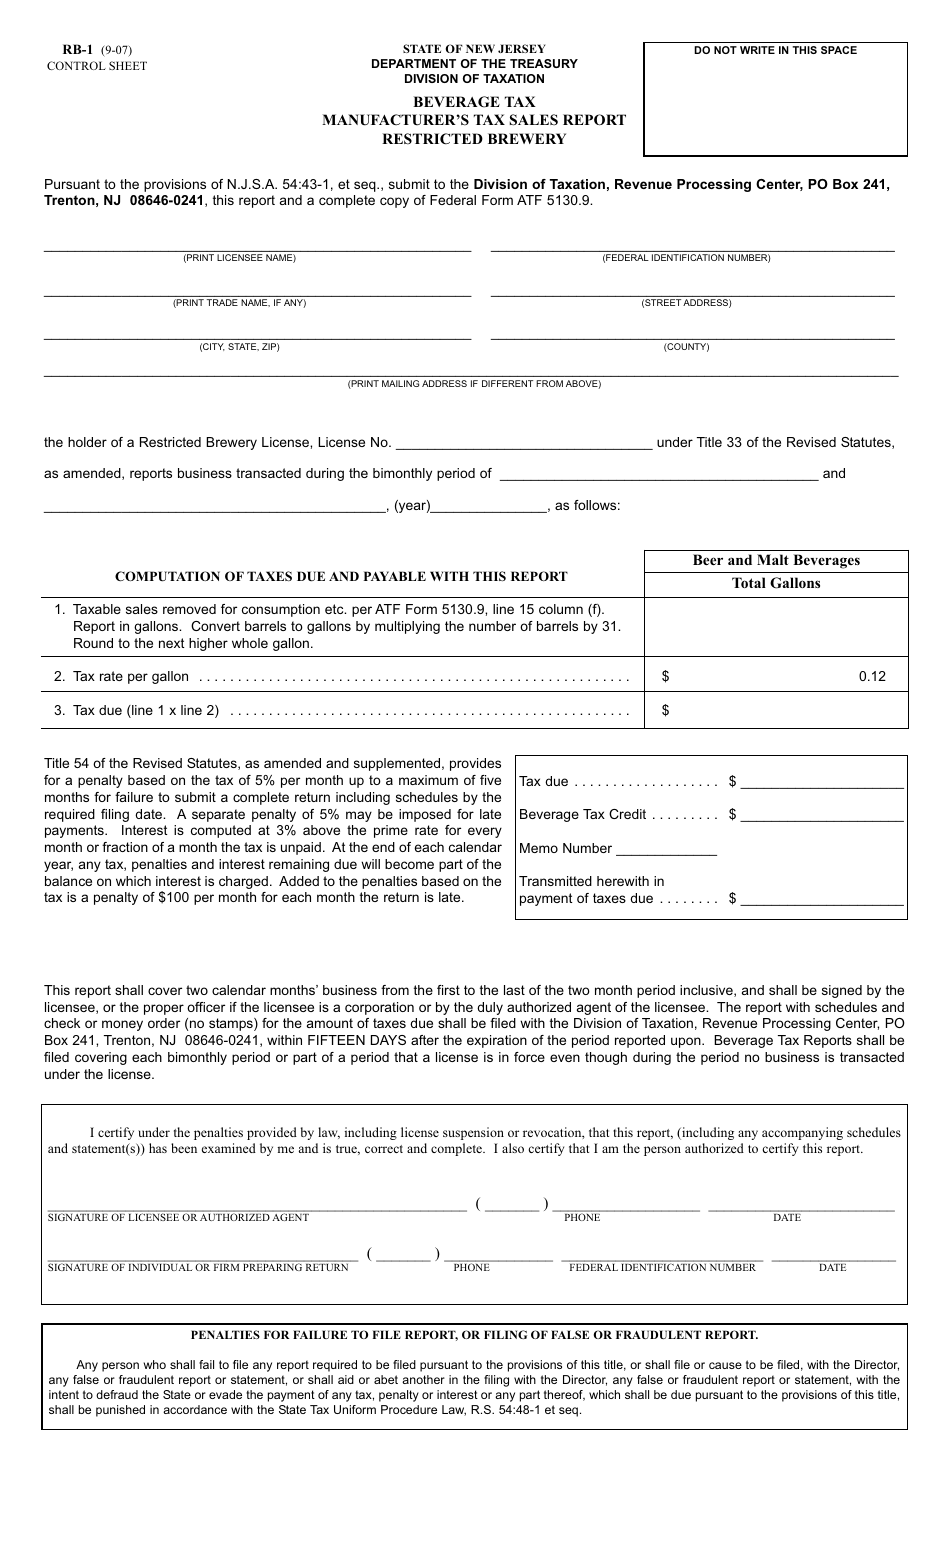 Form RB-1 Beverage Tax Manufacturers Tax Sales Report - Restricted Brewery - New Jersey, Page 1